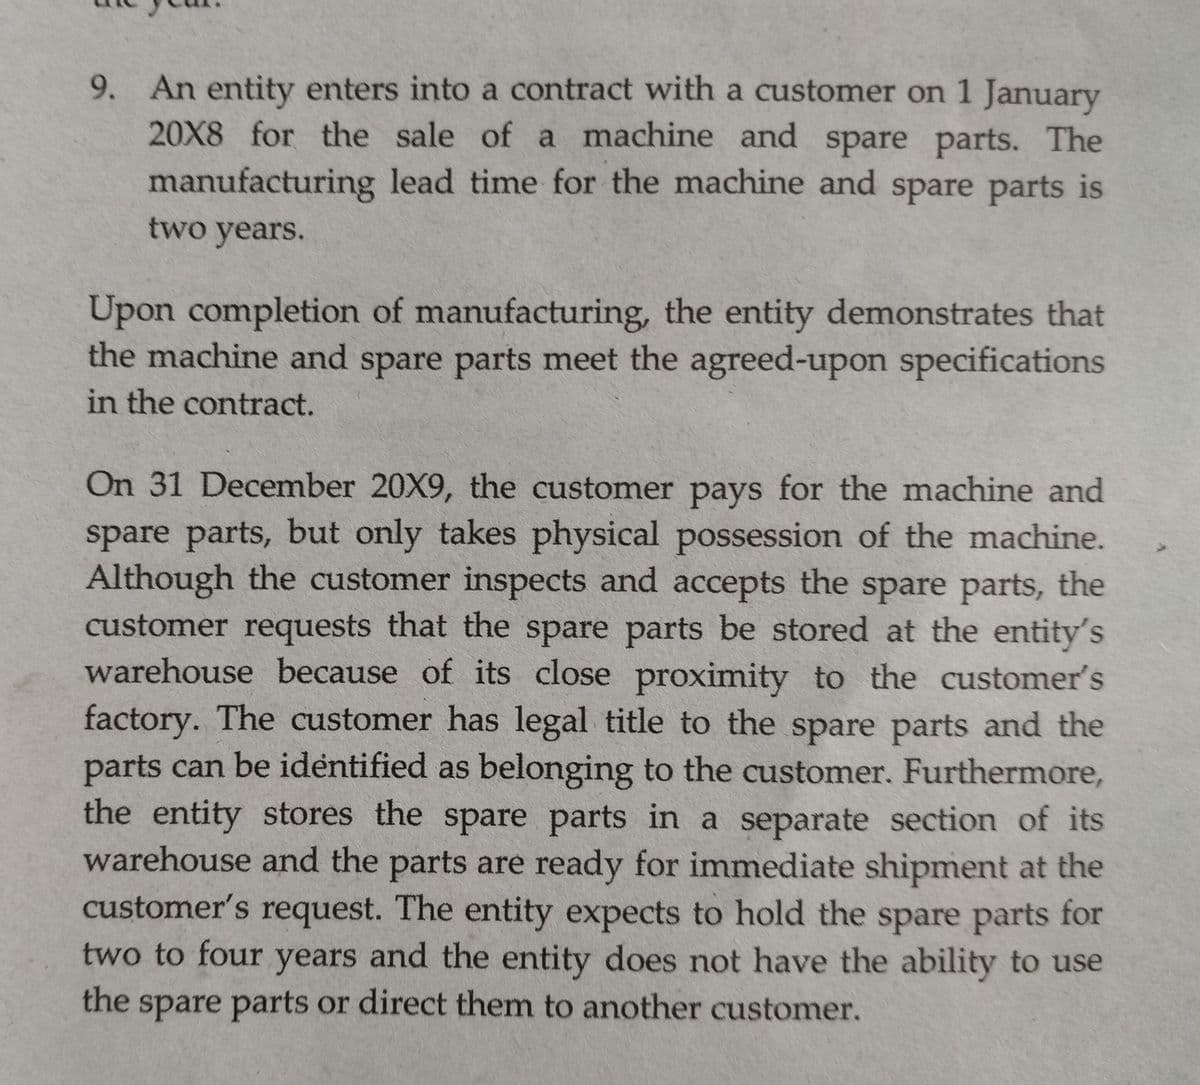 9. An entity enters into a contract with a customer on 1 January
20X8 for the sale of a machine and spare parts. The
manufacturing lead time for the machine and spare parts is
two years.
Upon completion of manufacturing, the entity demonstrates that
the machine and spare parts meet the agreed-upon specifications
in the contract.
On 31 December 20X9, the customer pays for the machine and
spare parts, but only takes physical possession of the machine.
Although the customer inspects and accepts the spare parts, the
customer requests that the spare parts be stored at the entity's
warehouse because of its close proximity to the customer's
factory. The customer has legal title to the spare parts and the
parts can be identified as belonging to the customer. Furthermore,
the entity stores the spare parts in a separate section of its
warehouse arnd the parts are ready for immediate shipment at the
customer's request. The entity expects to hold the spare parts for
two to four years and the entity does not have the ability to use
the
spare parts or direct them to another customer.
